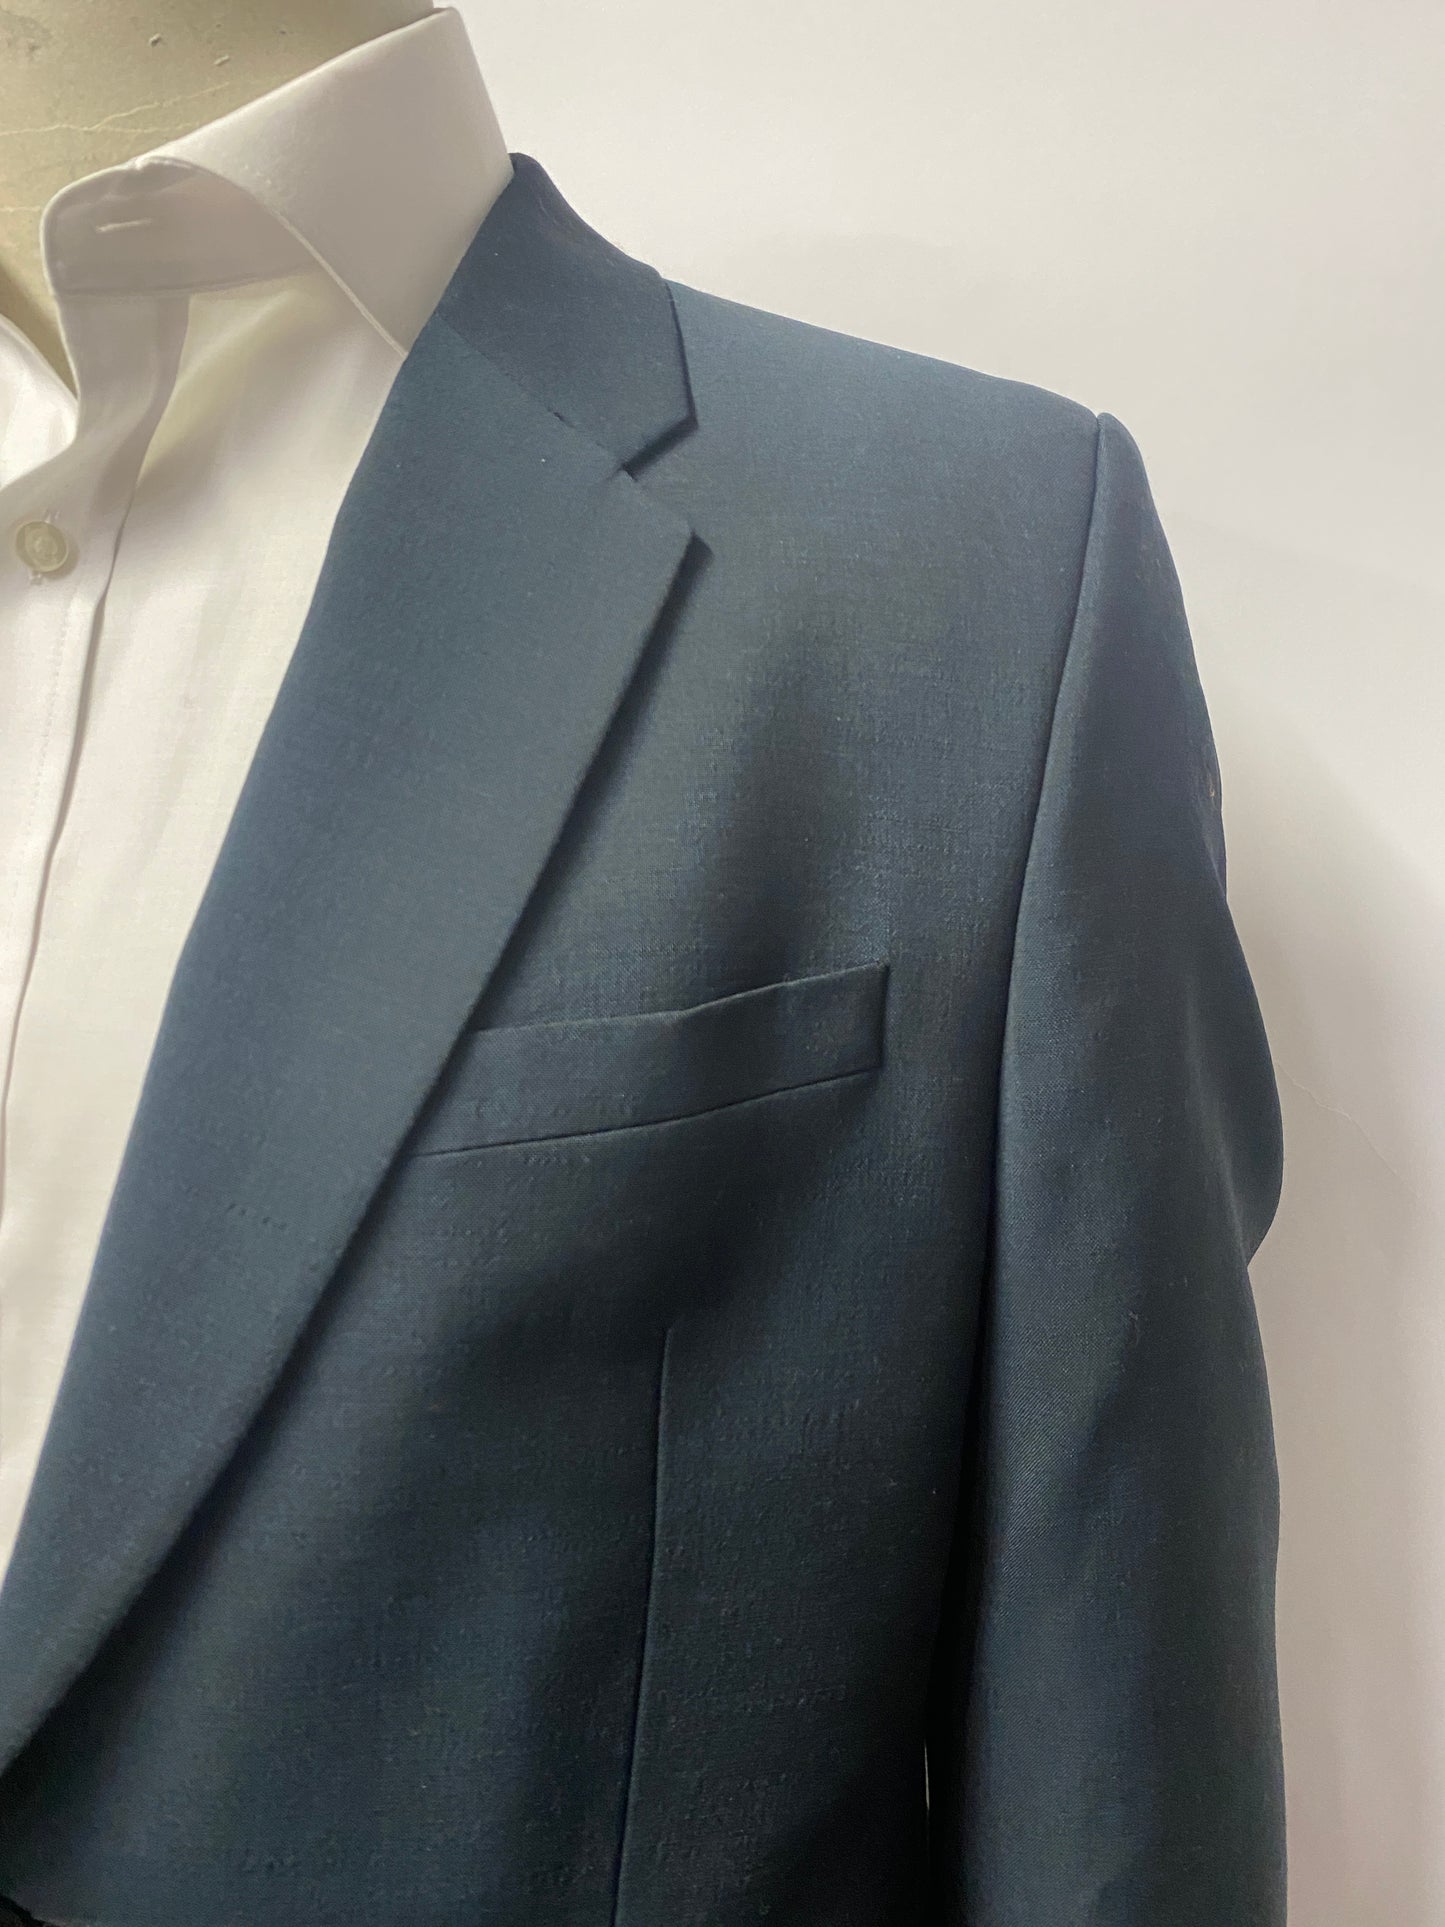 Paul Smith Deep Teal Wool and Mohair Suit 36/44